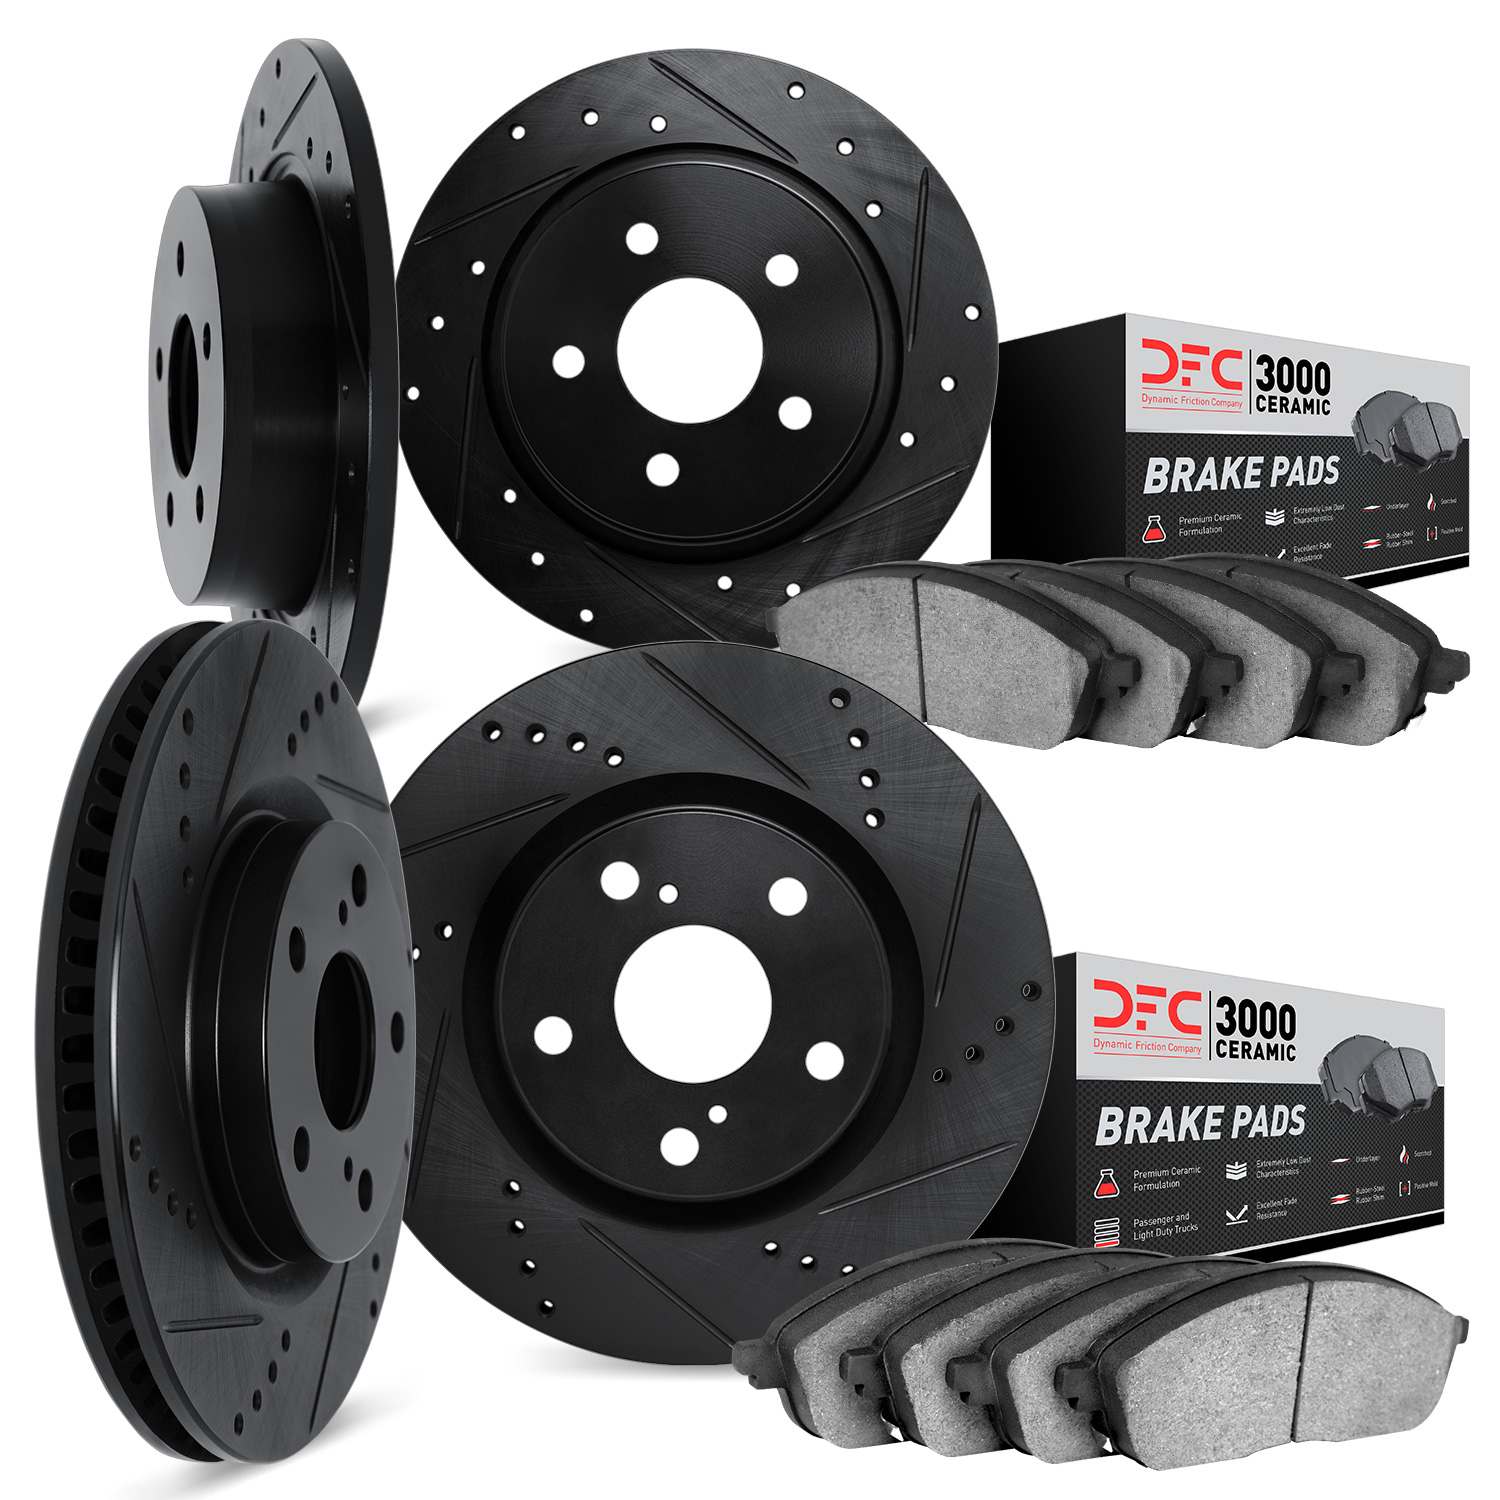 8304-58014 Drilled/Slotted Brake Rotors with 3000-Series Ceramic Brake Pads Kit [Black], 2015-2020 Acura/Honda, Position: Front